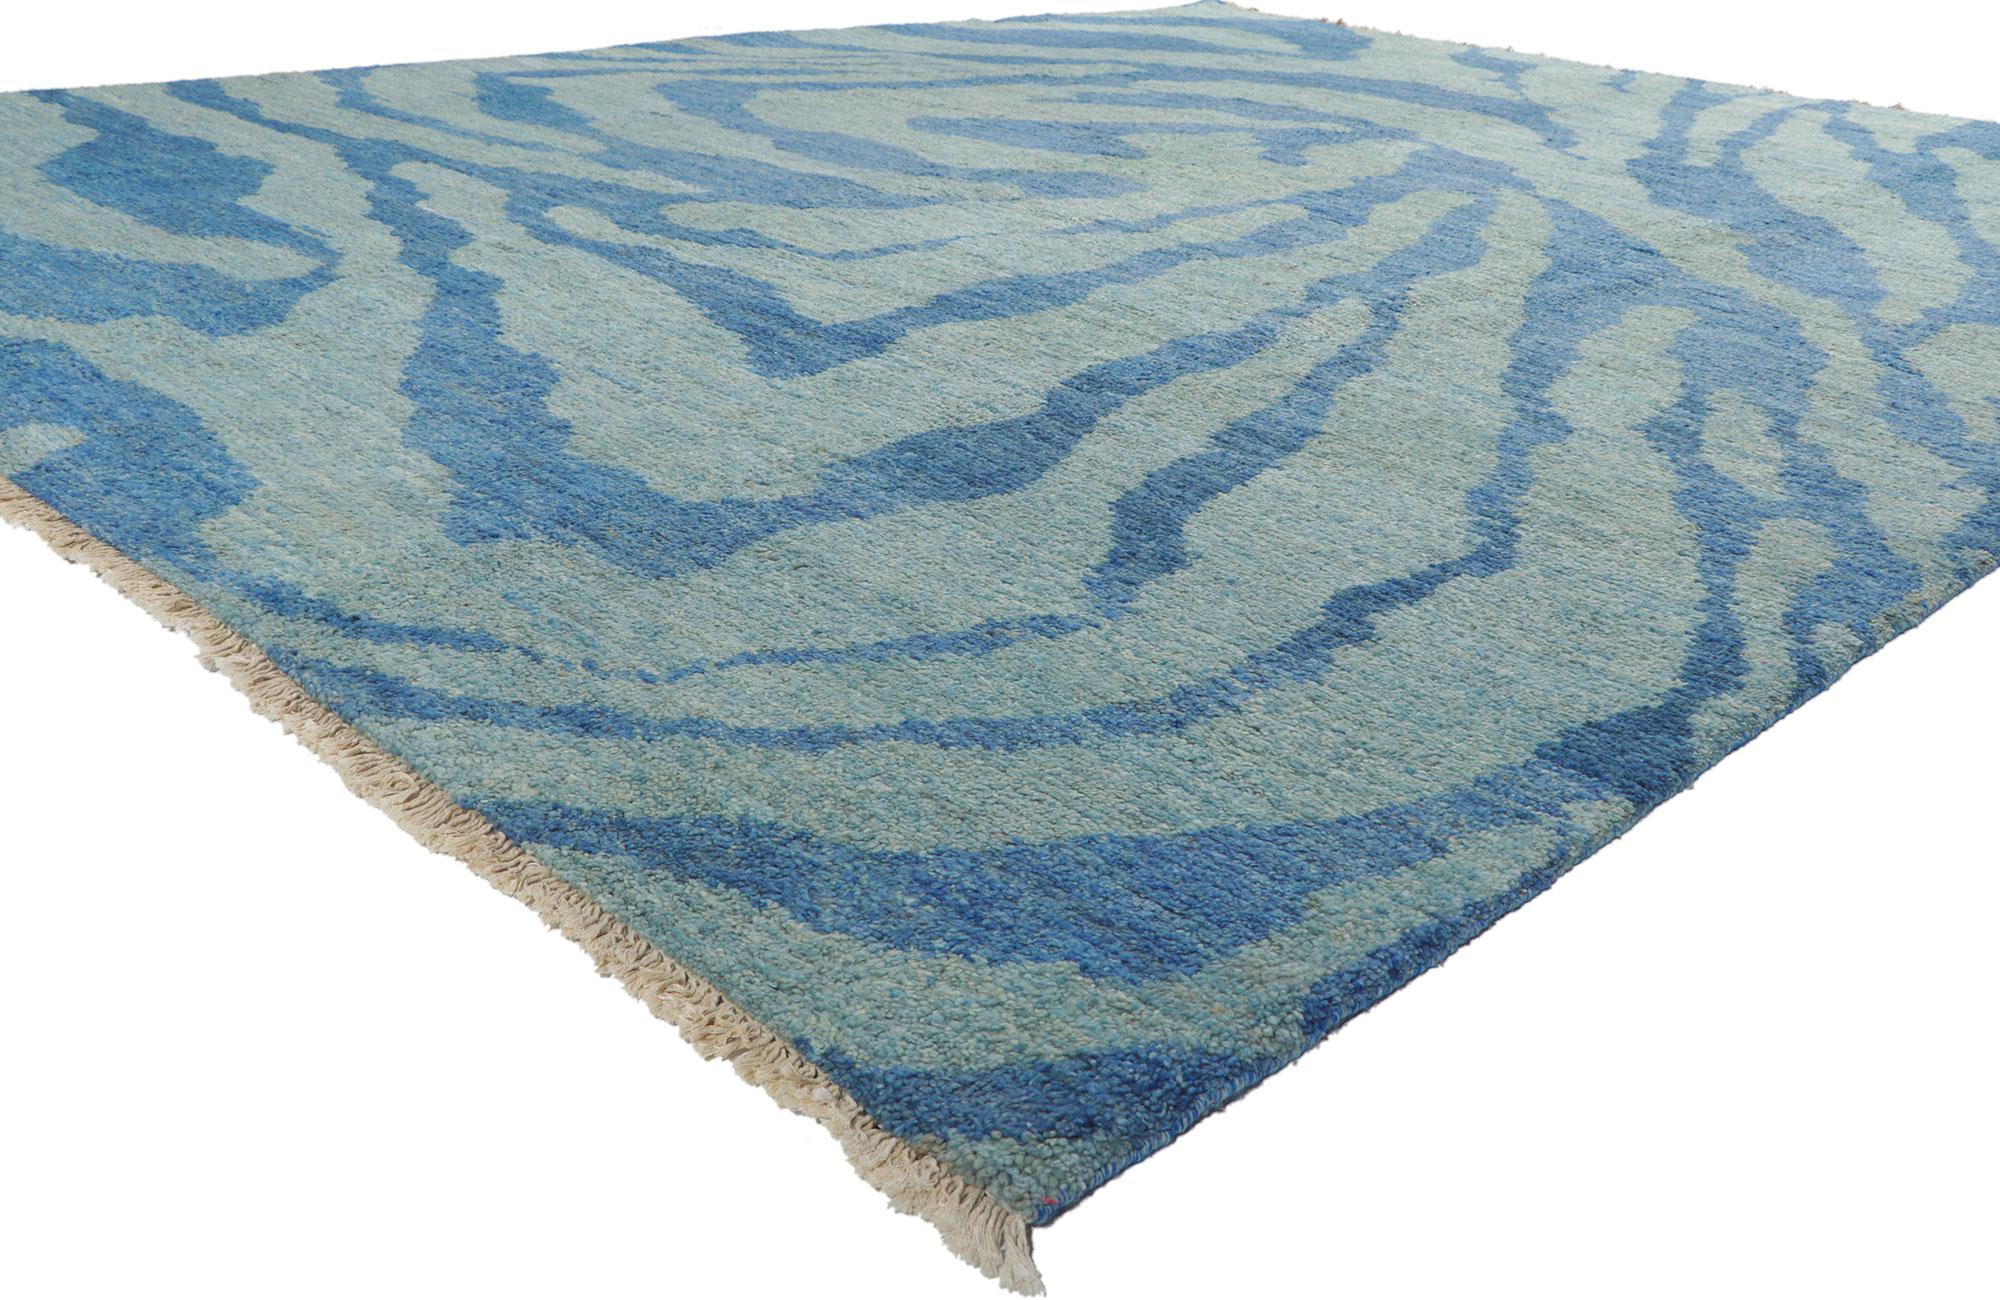 80382 New Abstract Moroccan Rug, 10'06 x 13'04.
Emanating a sea of amorphous swirls with incredible detail and texture, this Moroccan area rug is a captivating vision of woven beauty. The abstract design and blue hues woven into this piece work